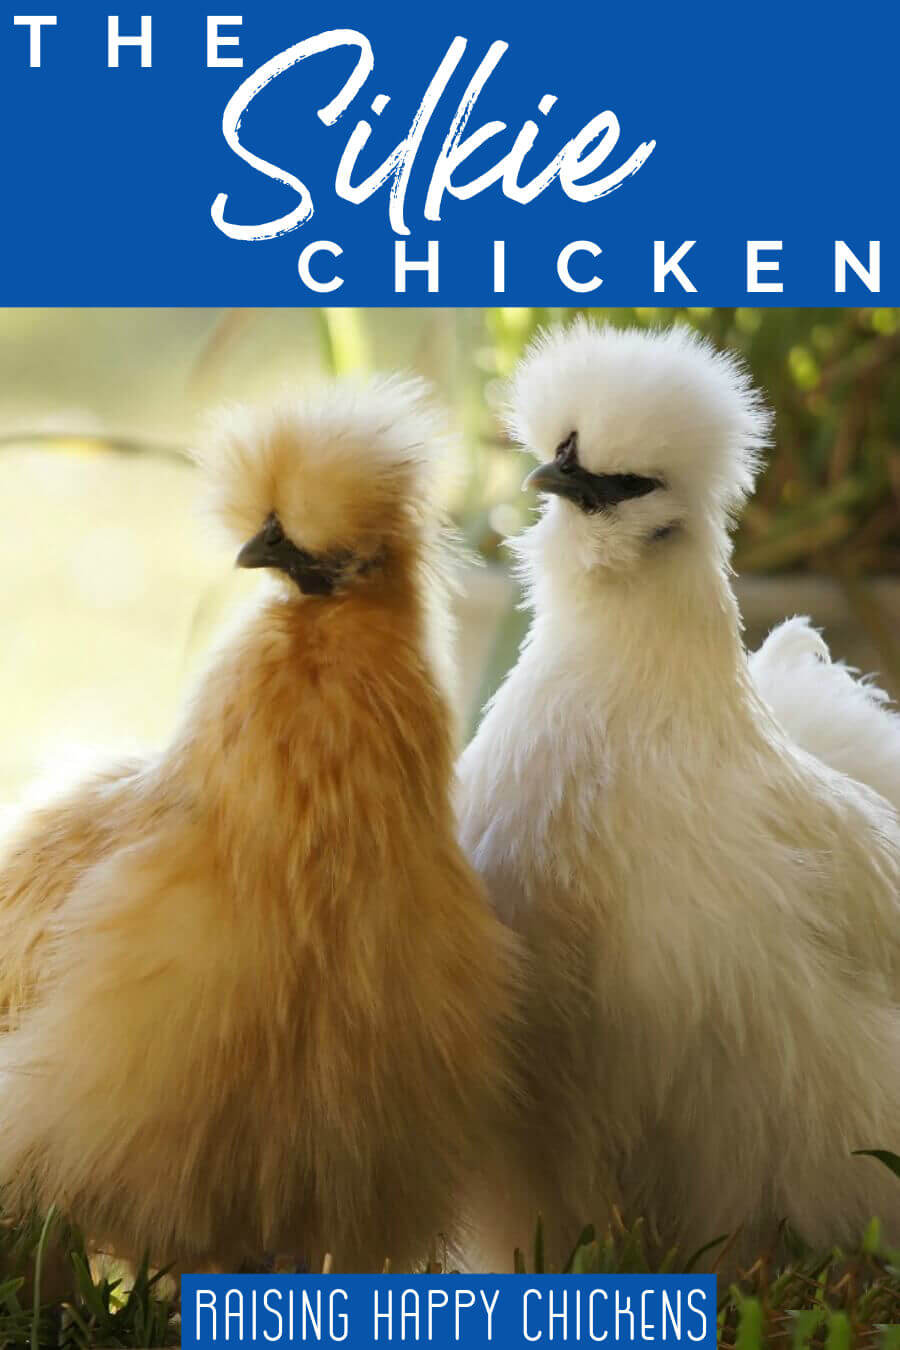 Silkie chickens: cuddly, kind, non-aggressive roos, good broodies - but are they the right chicken breed for your family? Find out, here!